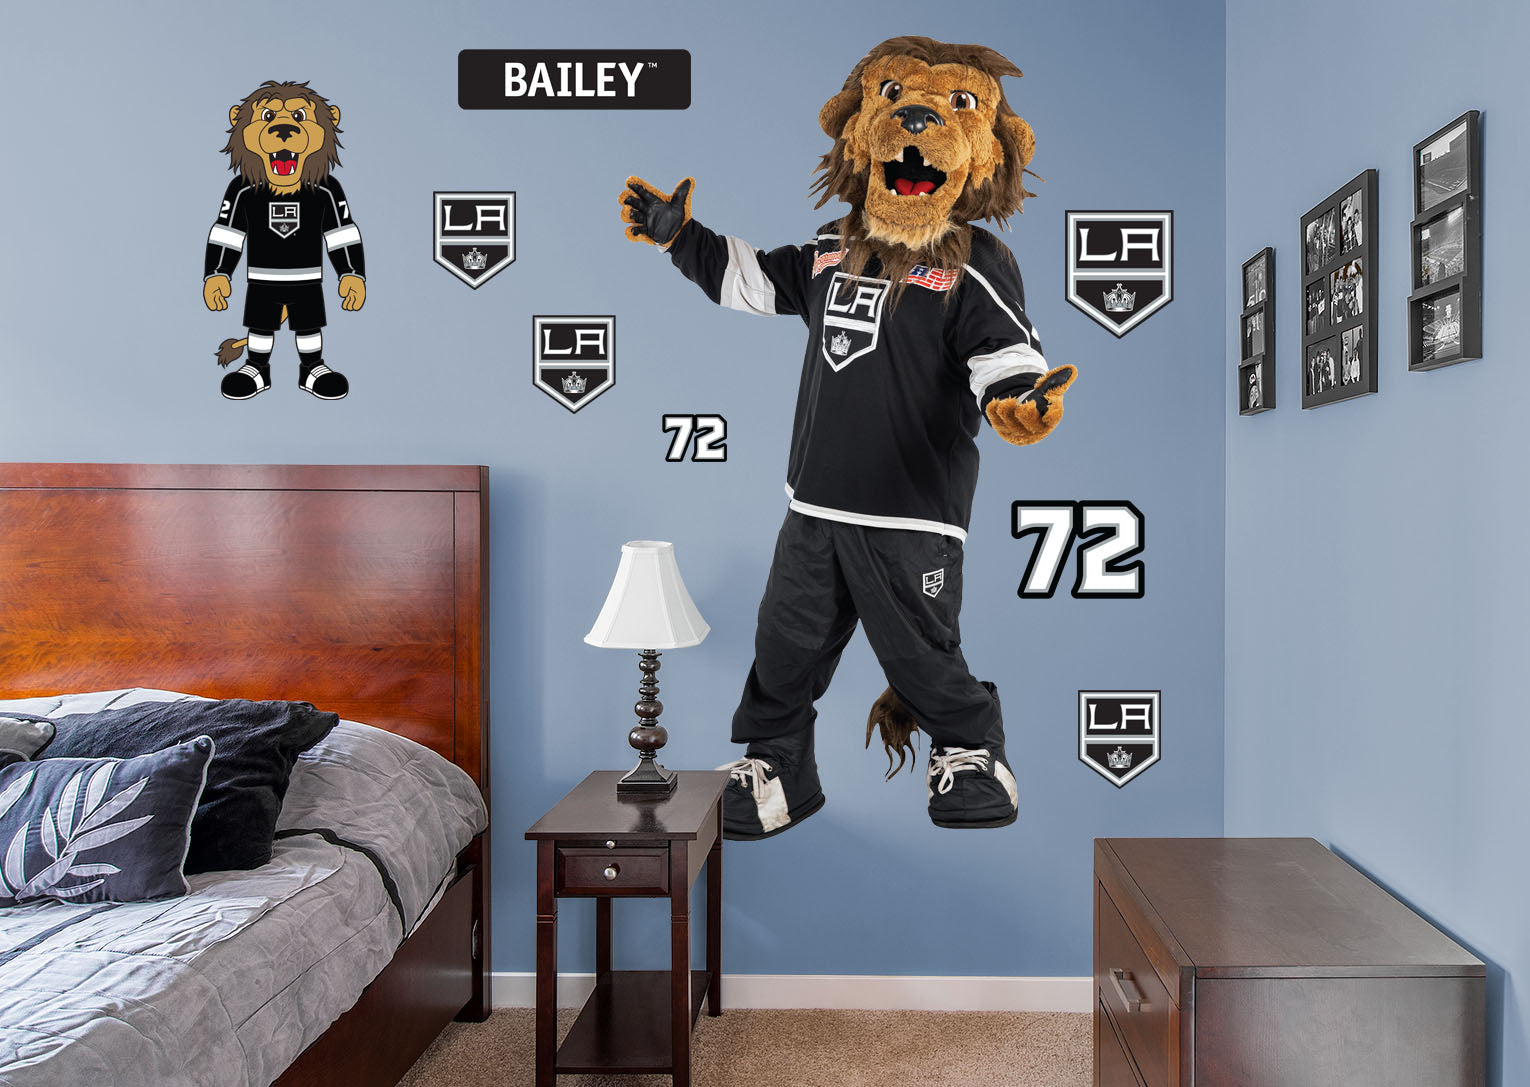 Los Angeles Kings: Bailey 2021 Mascot - NHL Removable Wall Adhesive Wall Decal Life-Size Athlete +2 Wall Decals 44W x 78H